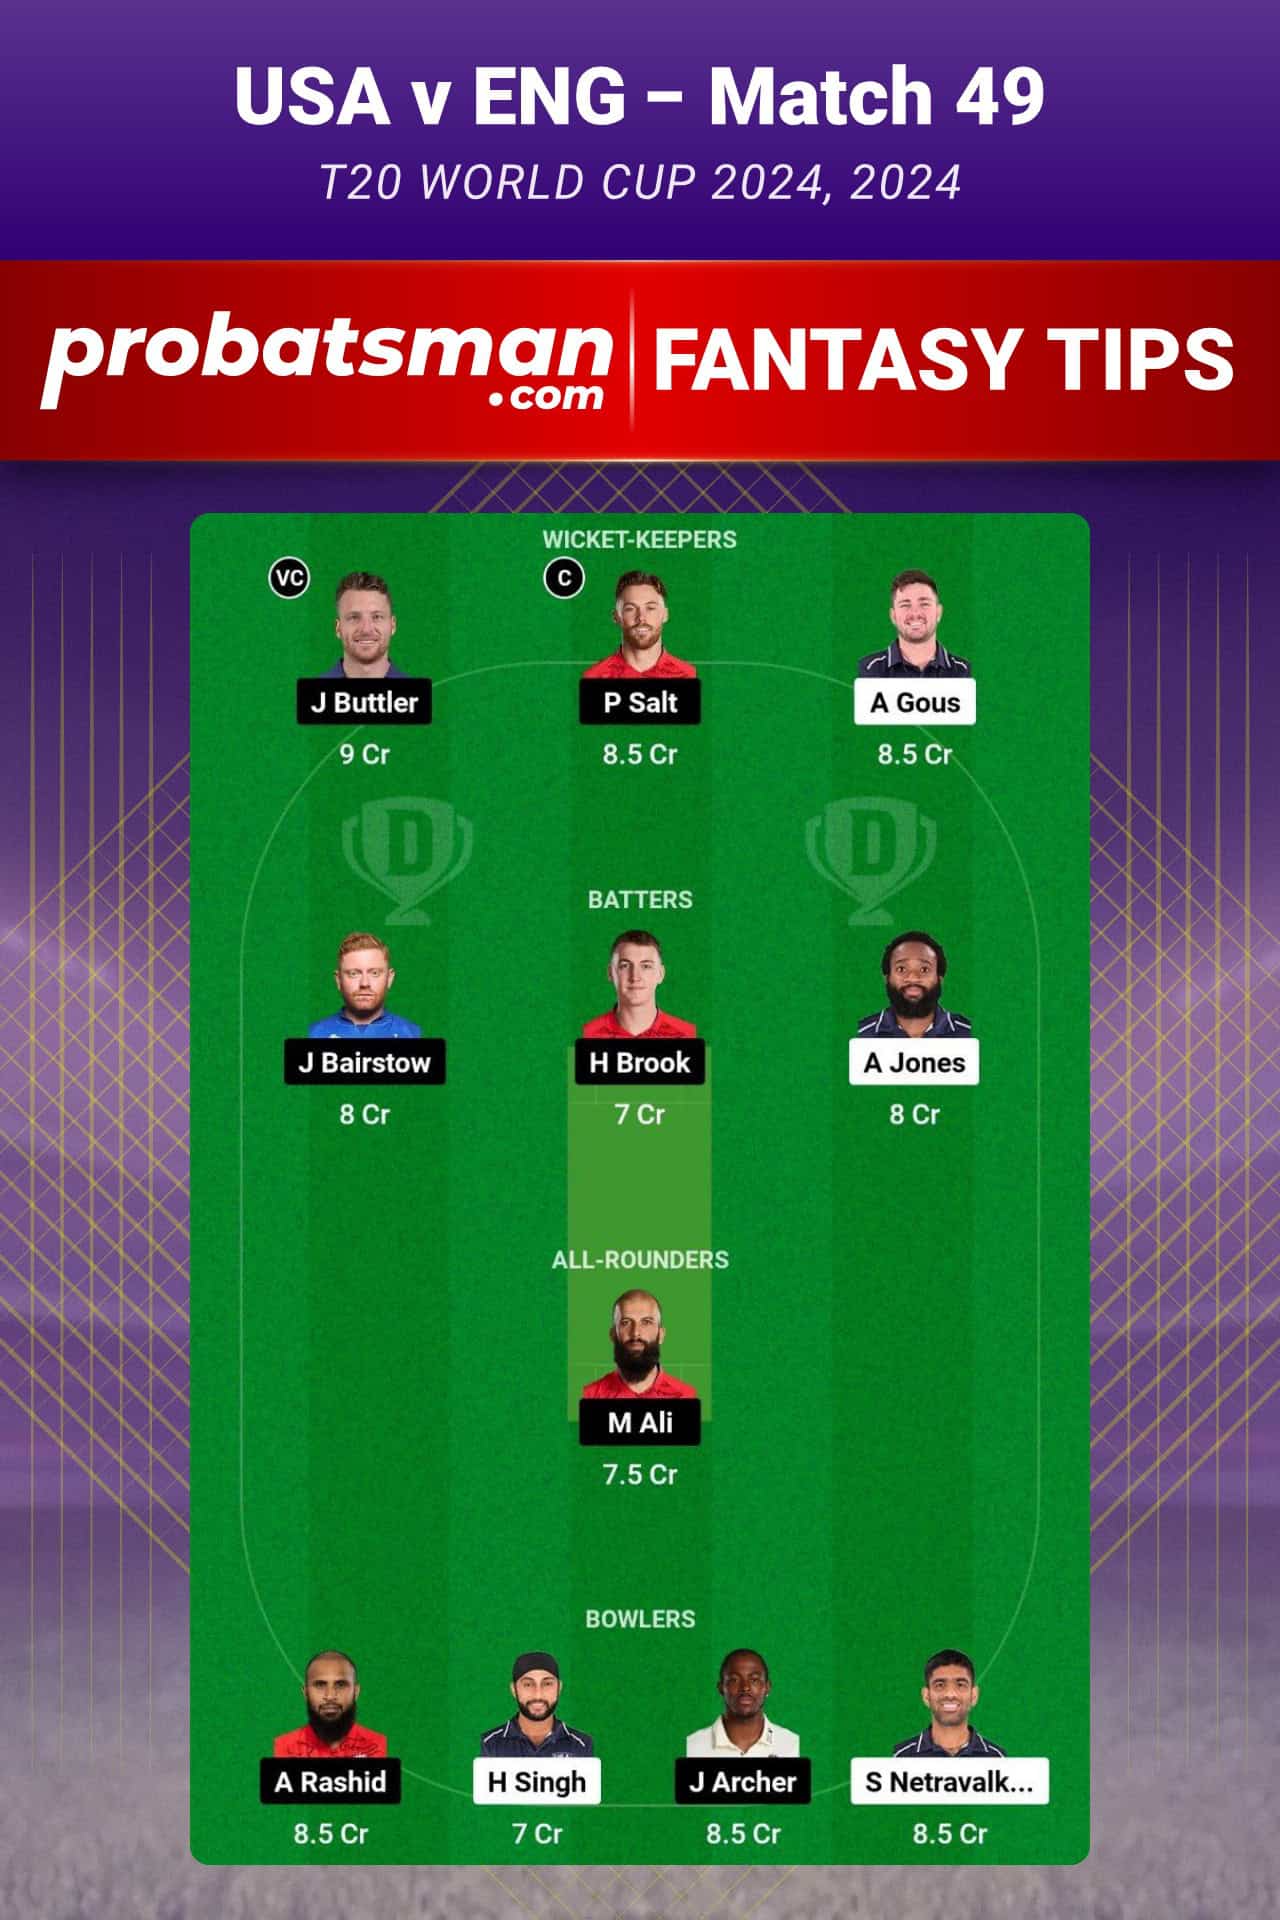 USA vs ENG Dream11 Prediction For Match 49 of T20 World Cup 2024